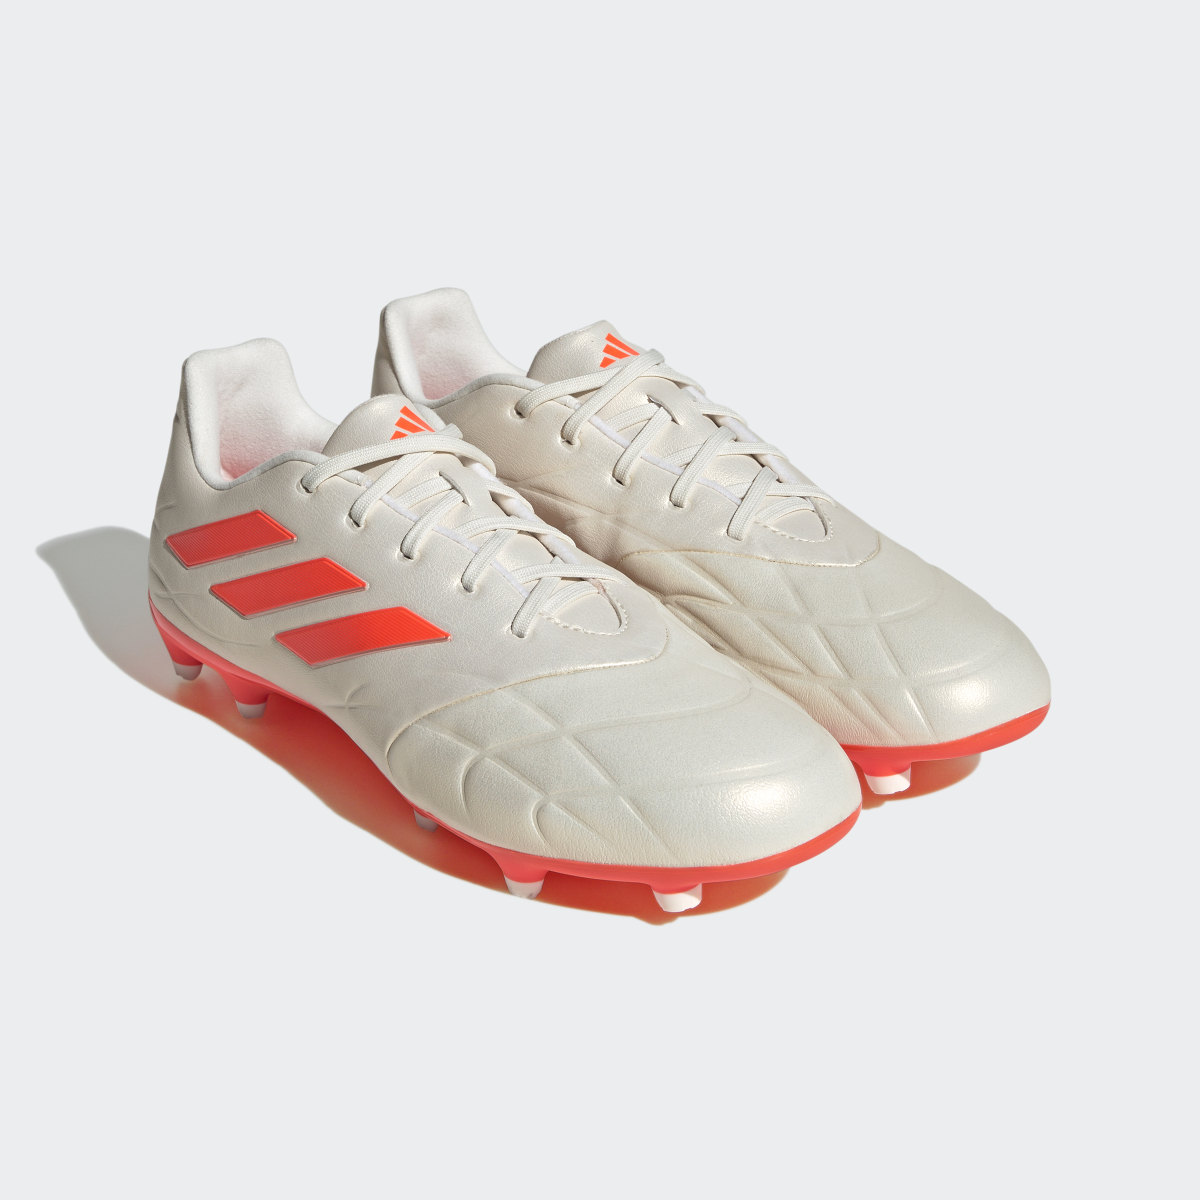 Adidas Copa Pure.3 Firm Ground Boots. 5